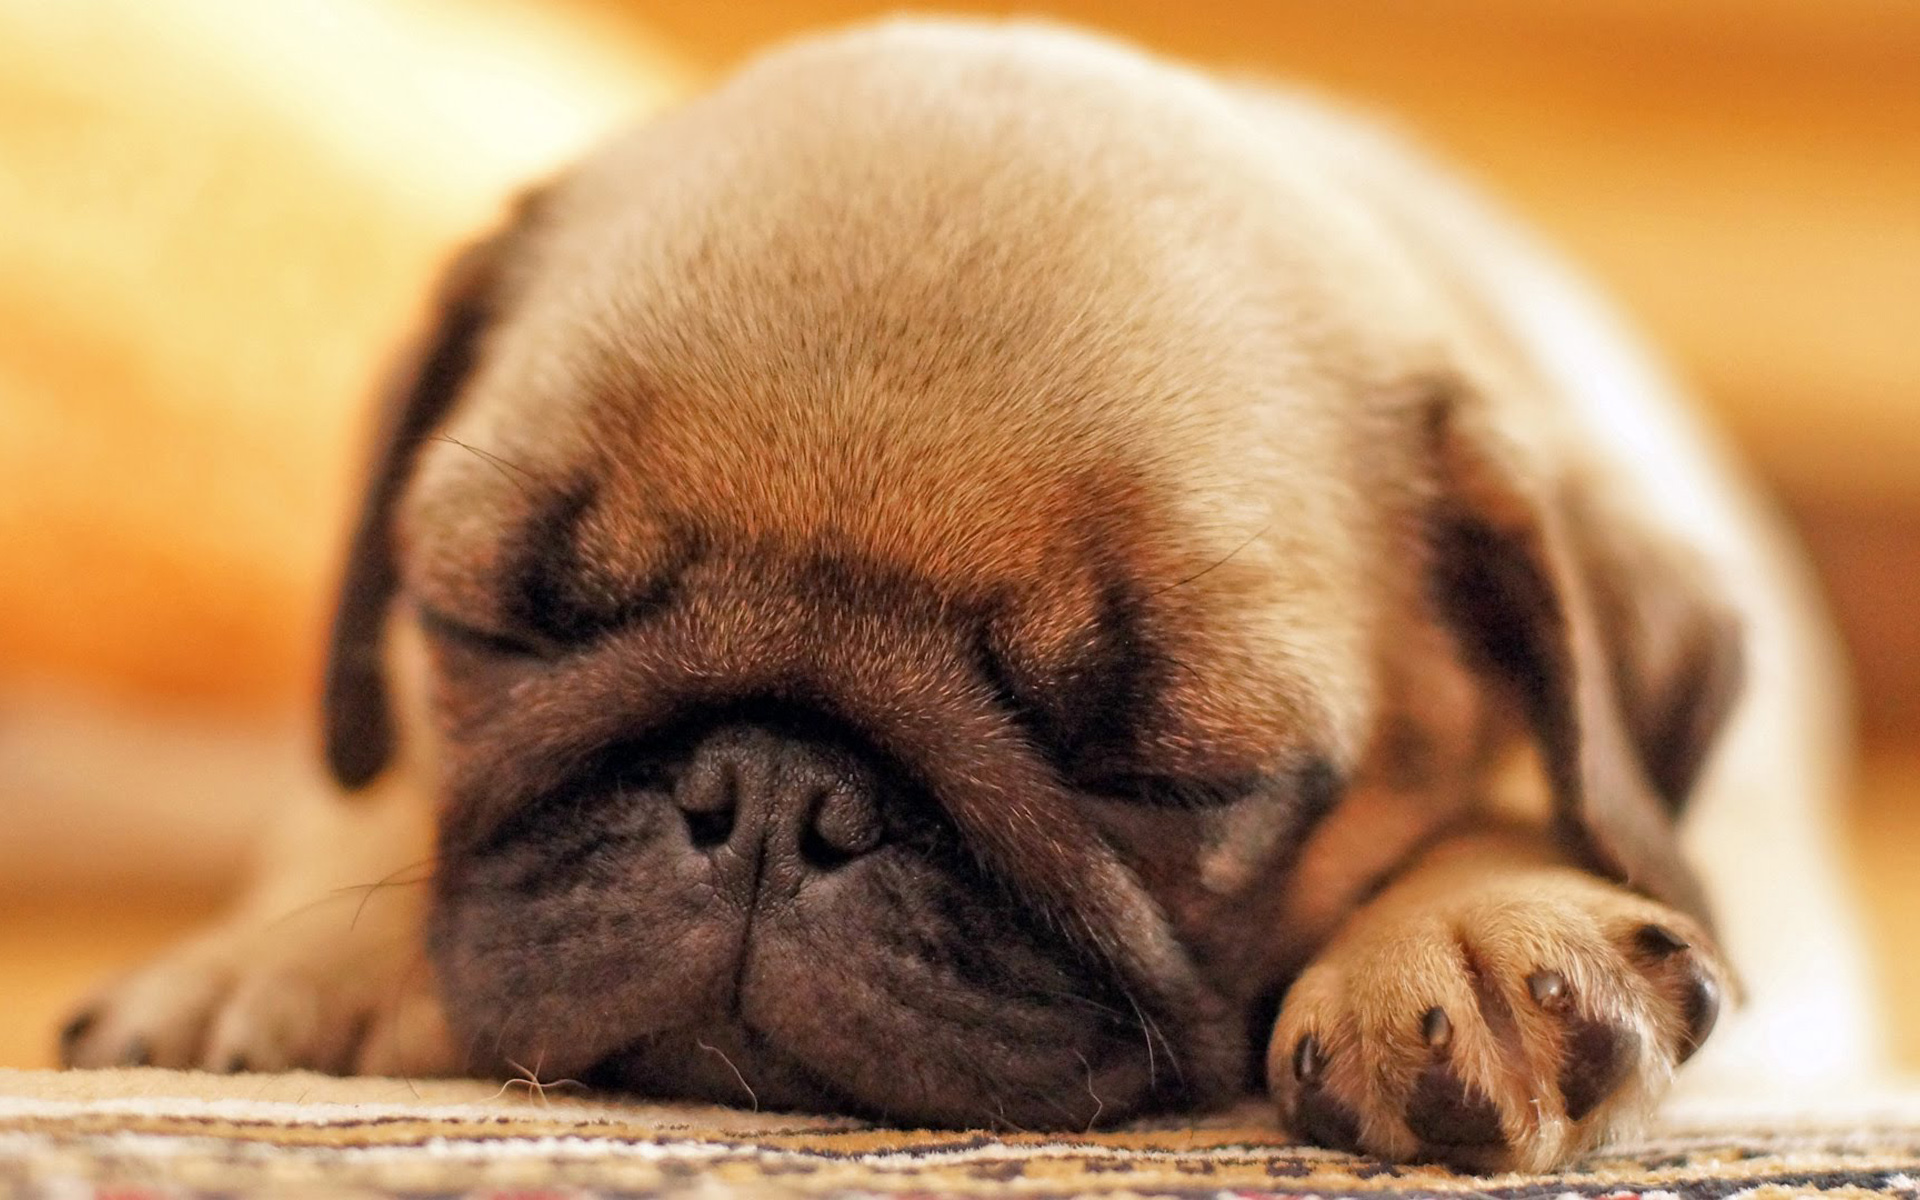 Download Wallpaper Pug, Sleeping Dog, Puppy, Close Up, Cute Dog, Pets, Small Pug, Cute Animals, Dogs, Pug Dog For Desktop With Resolution 1920x1200. High Quality HD Picture Wallpaper